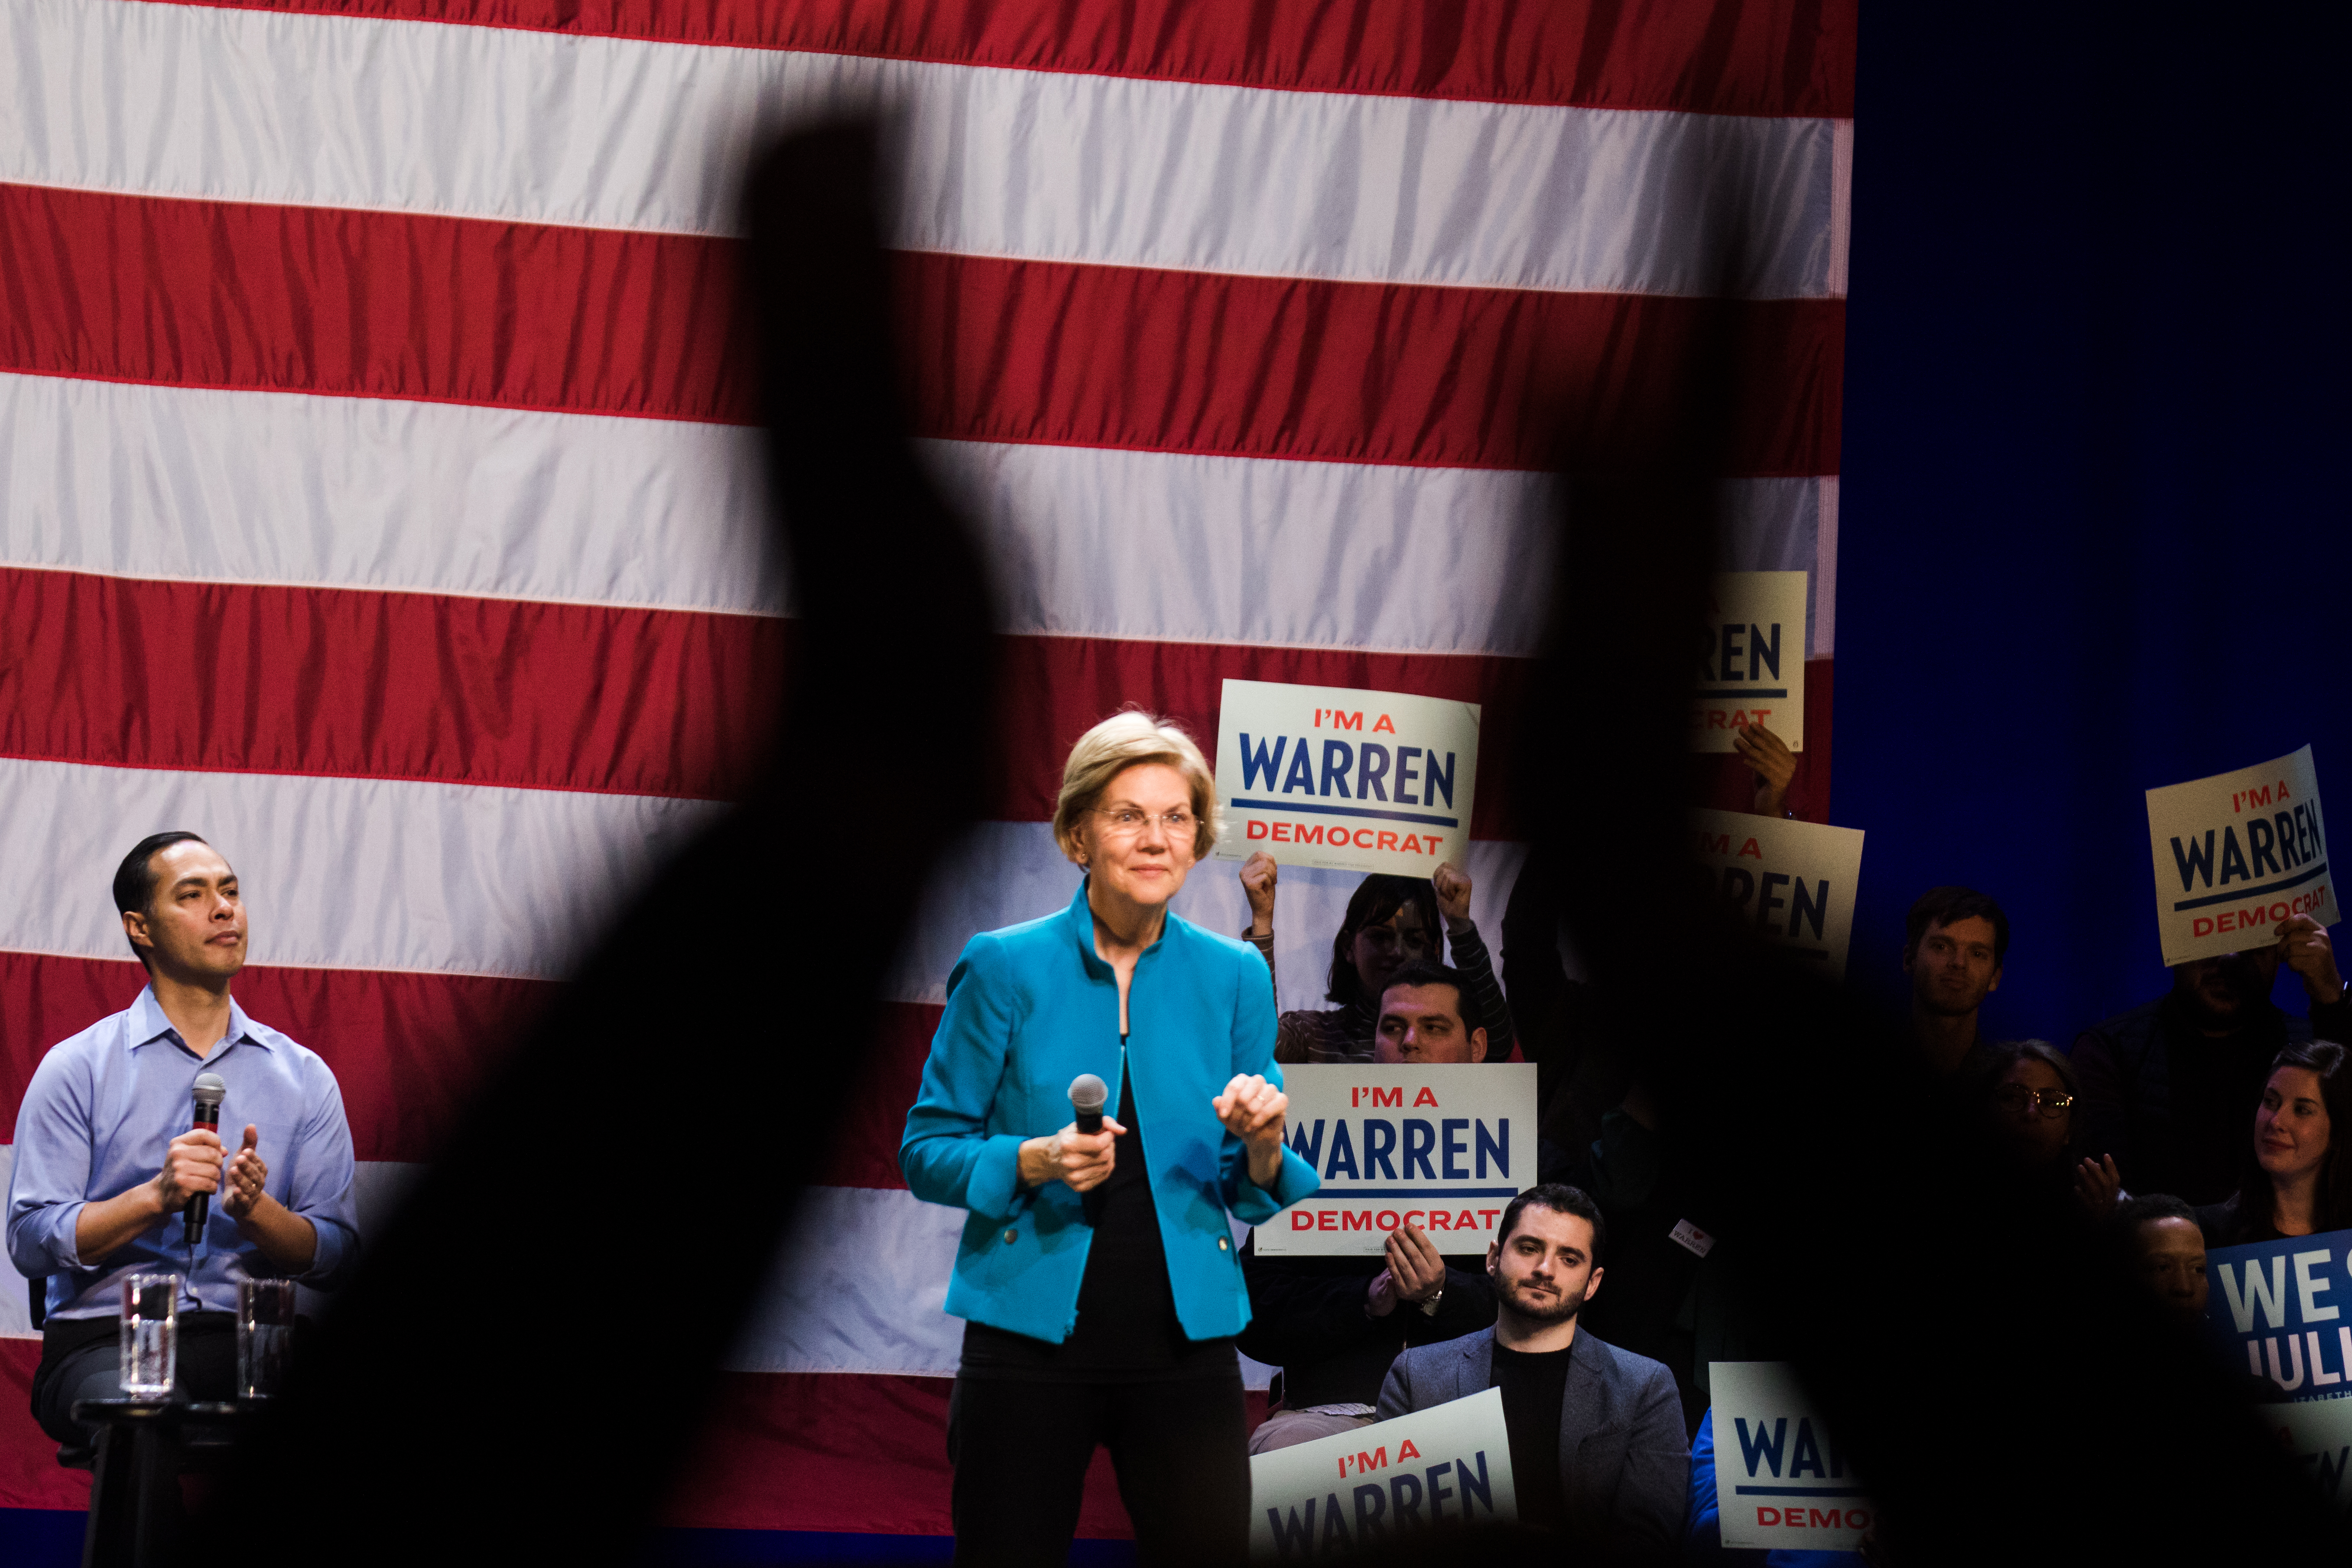 Warren spoke for about an hour to the Brooklyn crowd.